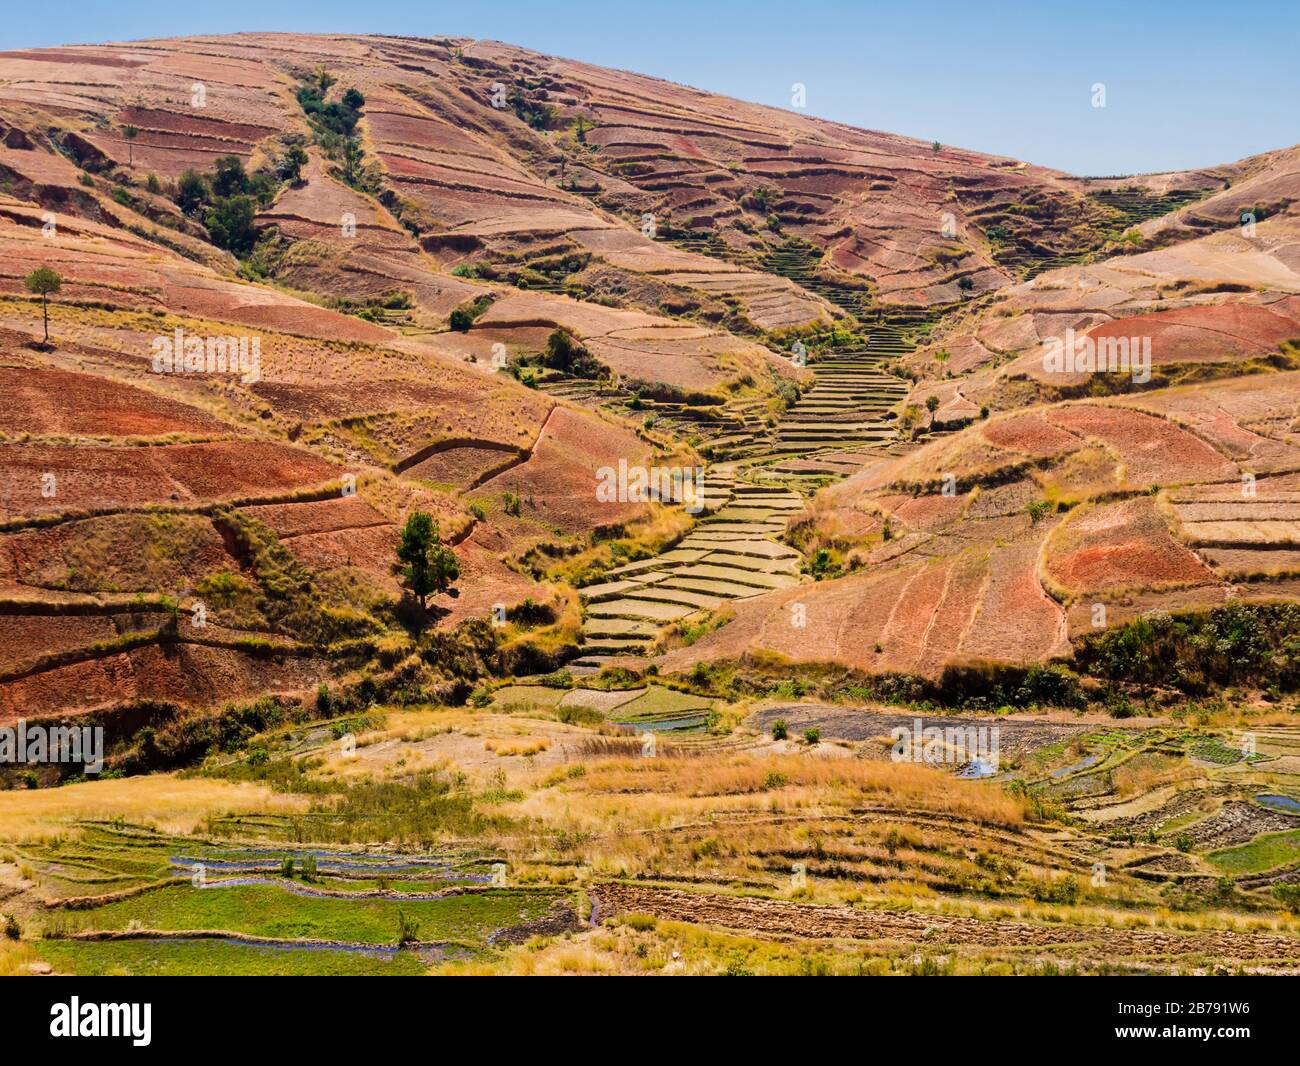 Rolling hills with terraced rice paddy fields in the highlands of Madagascar Stock Photo